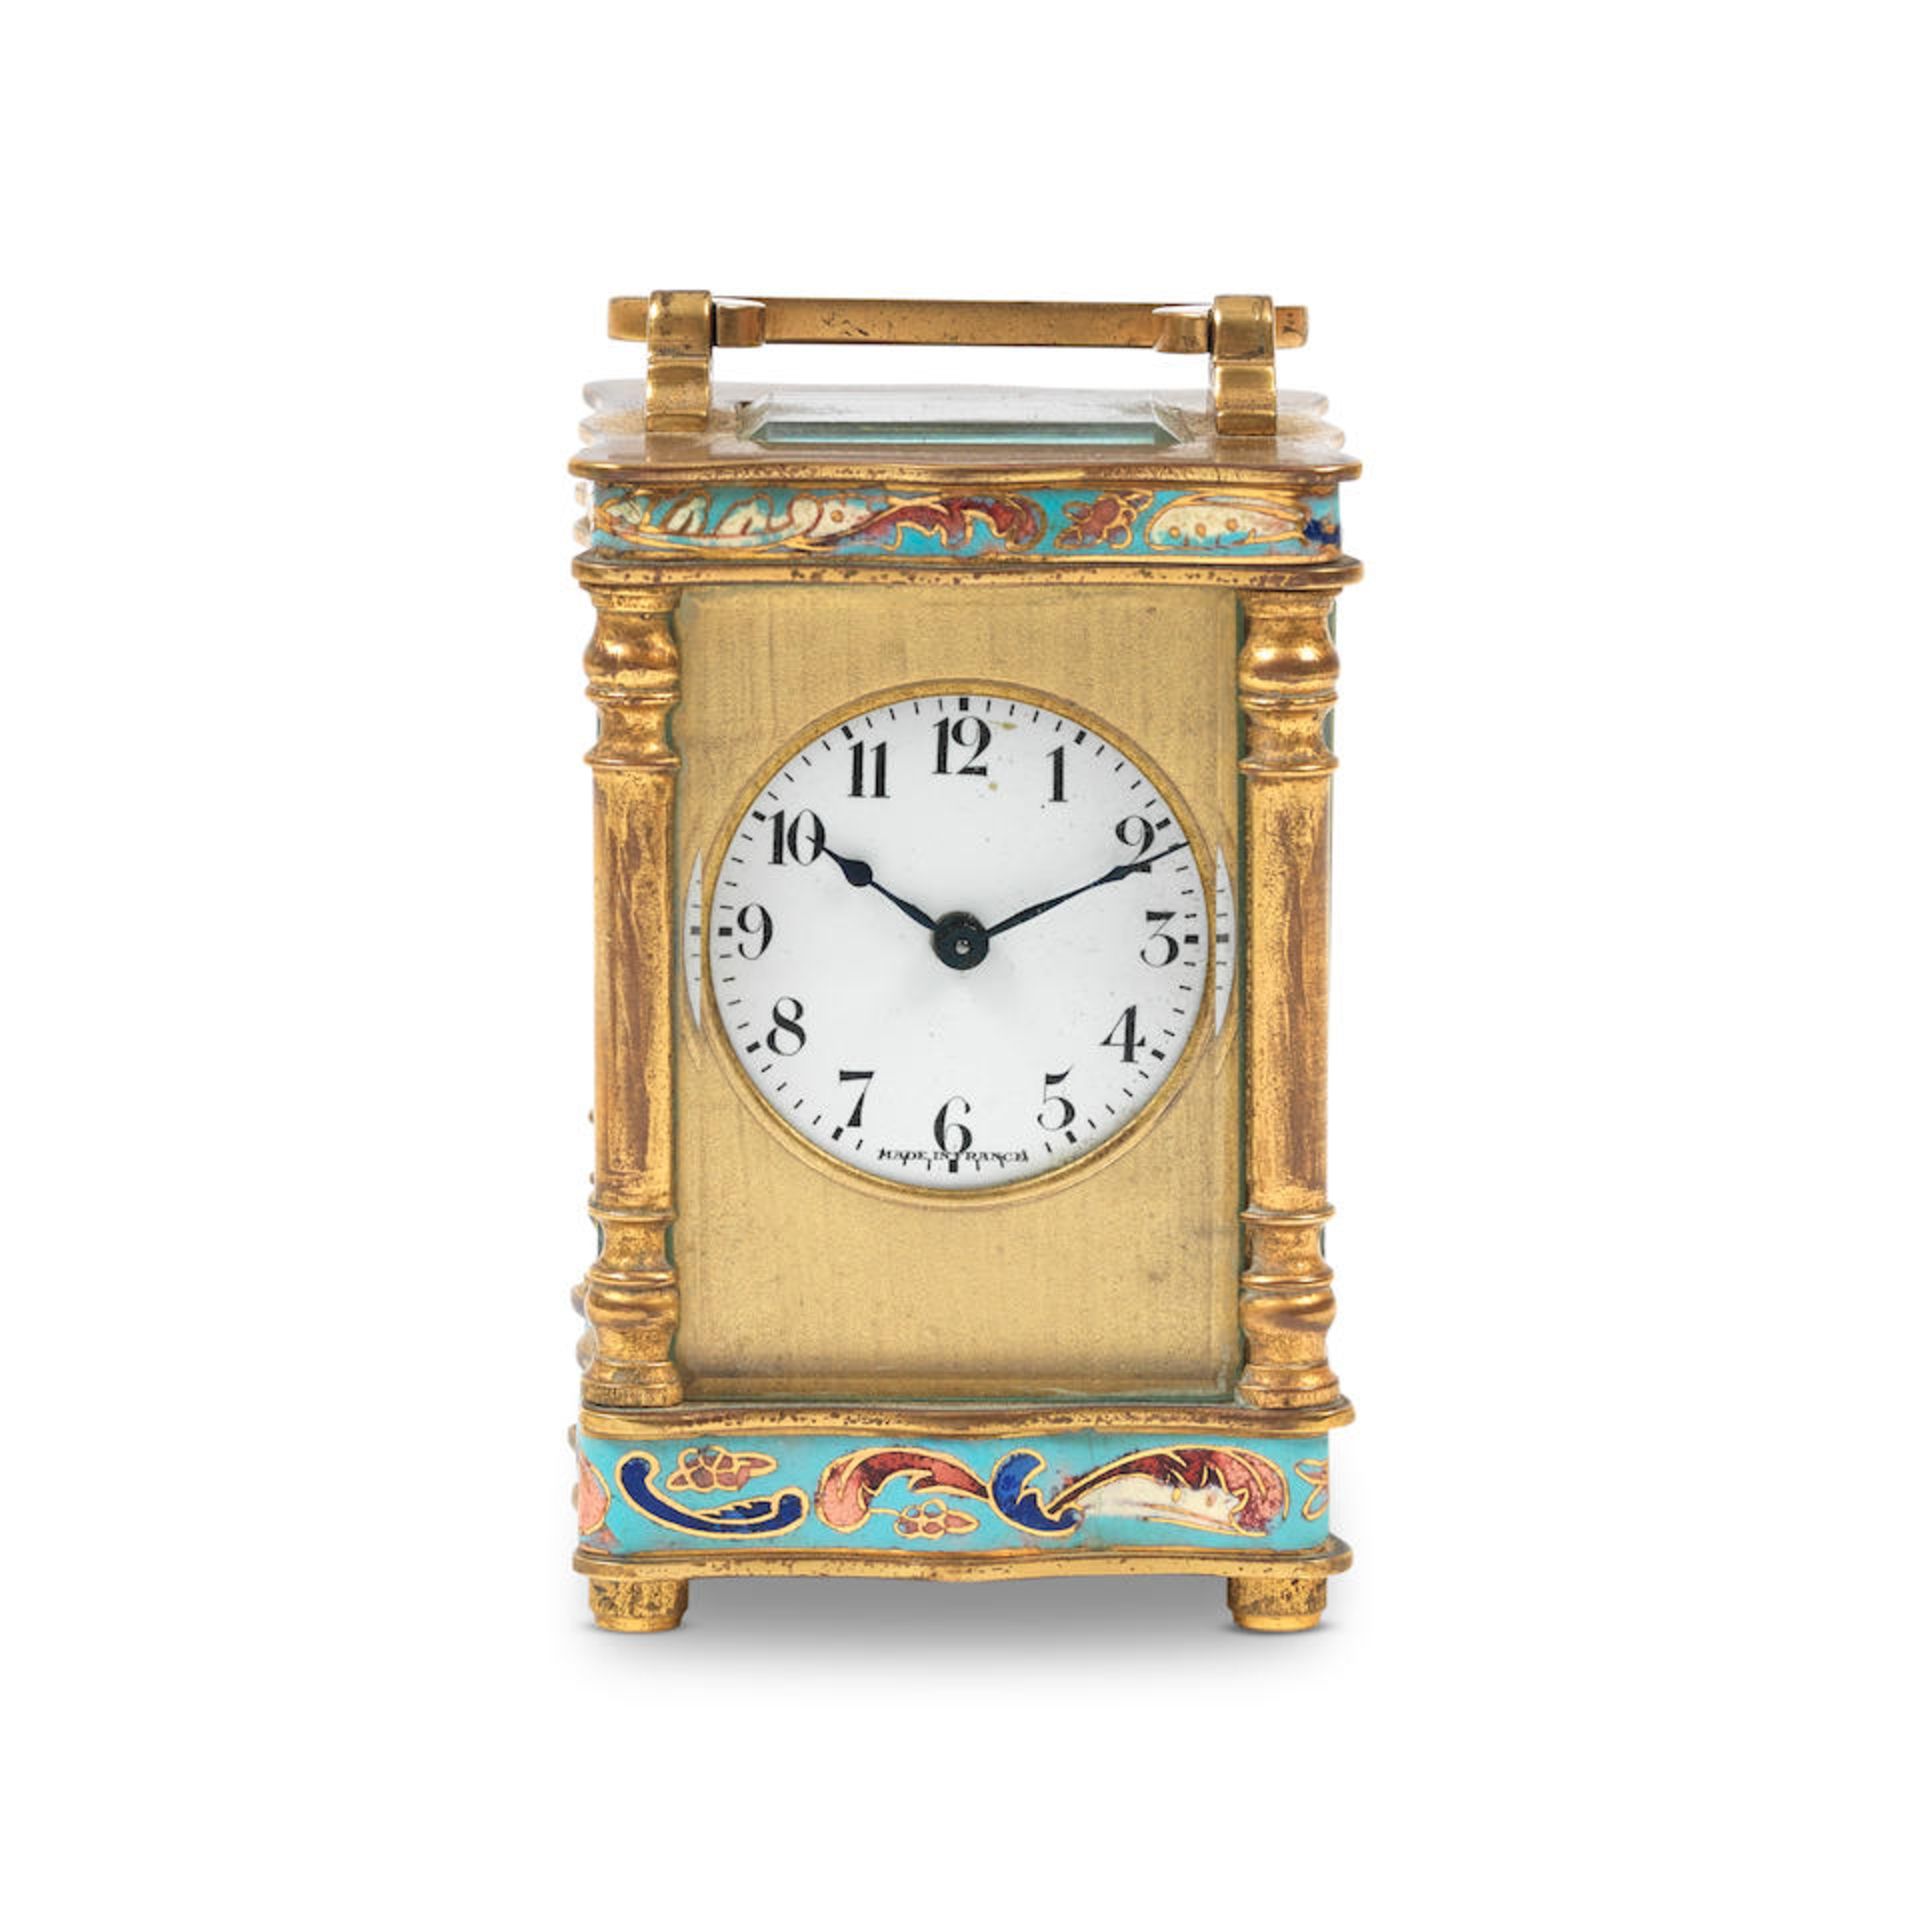 An early 20th century French gilt brass and champleve enamel miniature carriage timepiece